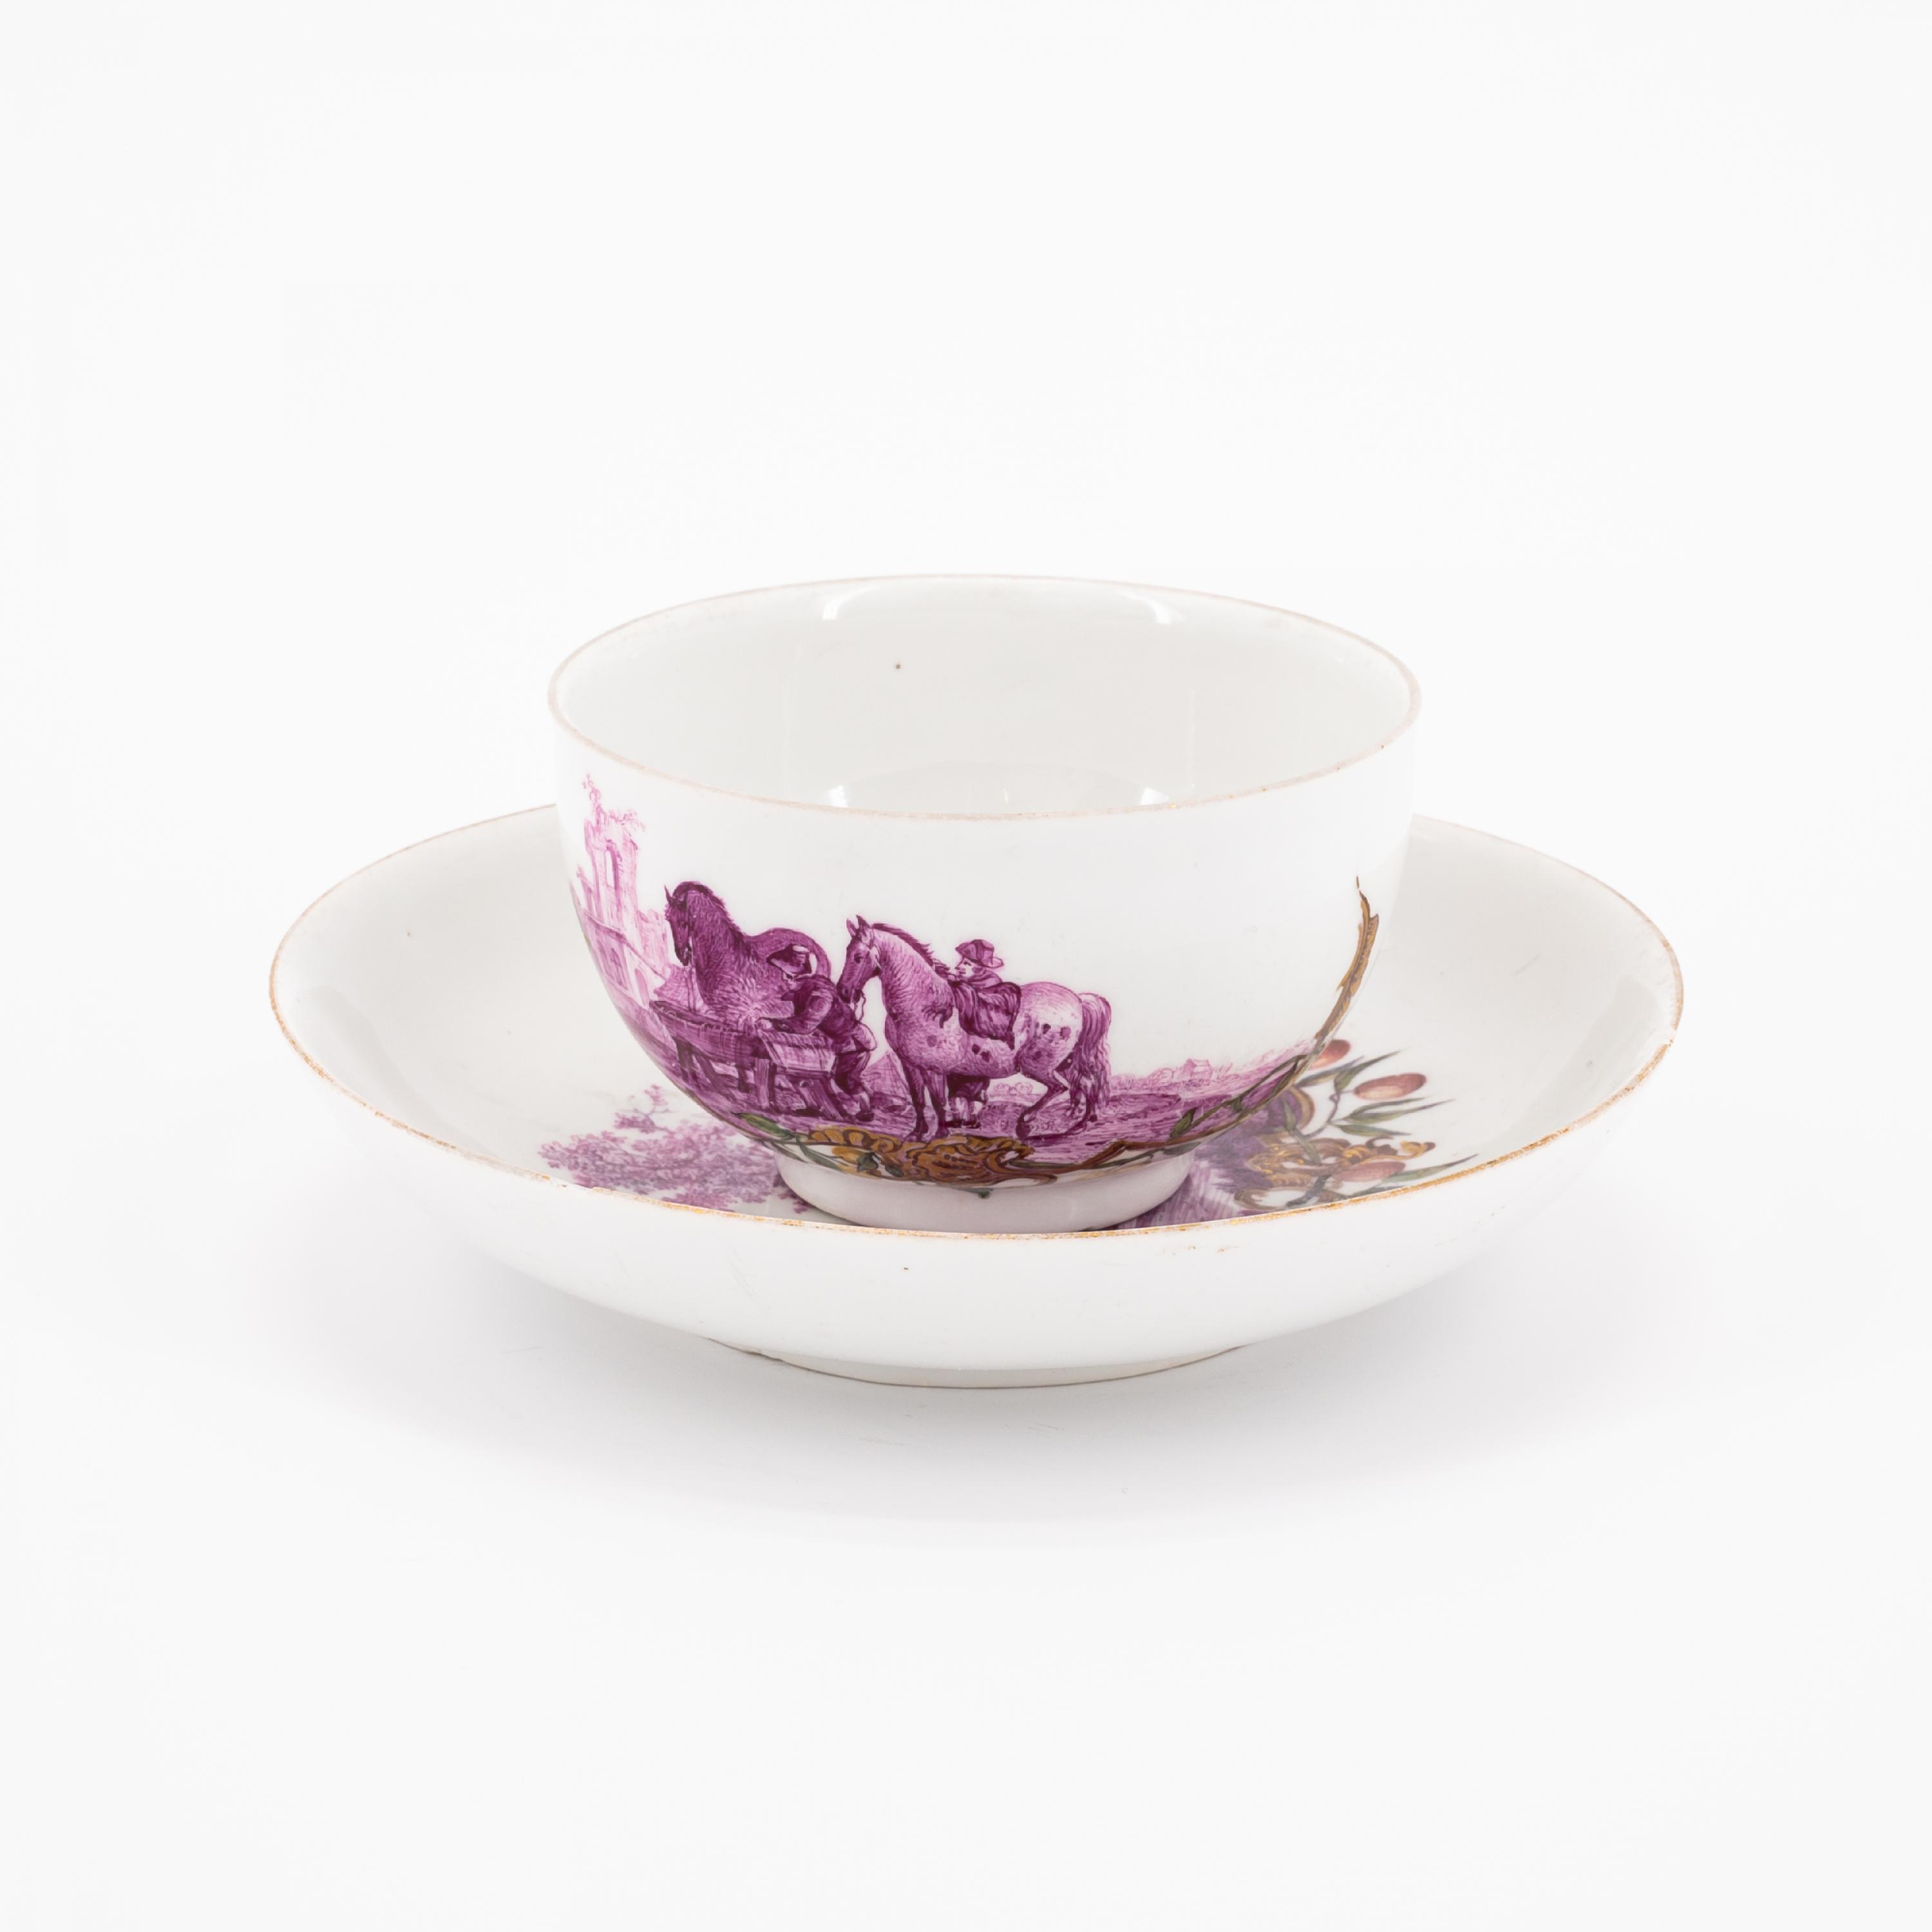 PORCELAIN CUP AND SAUCER WITH HUNTING SCENES IN PURPLE CAMAIEU - Image 4 of 6